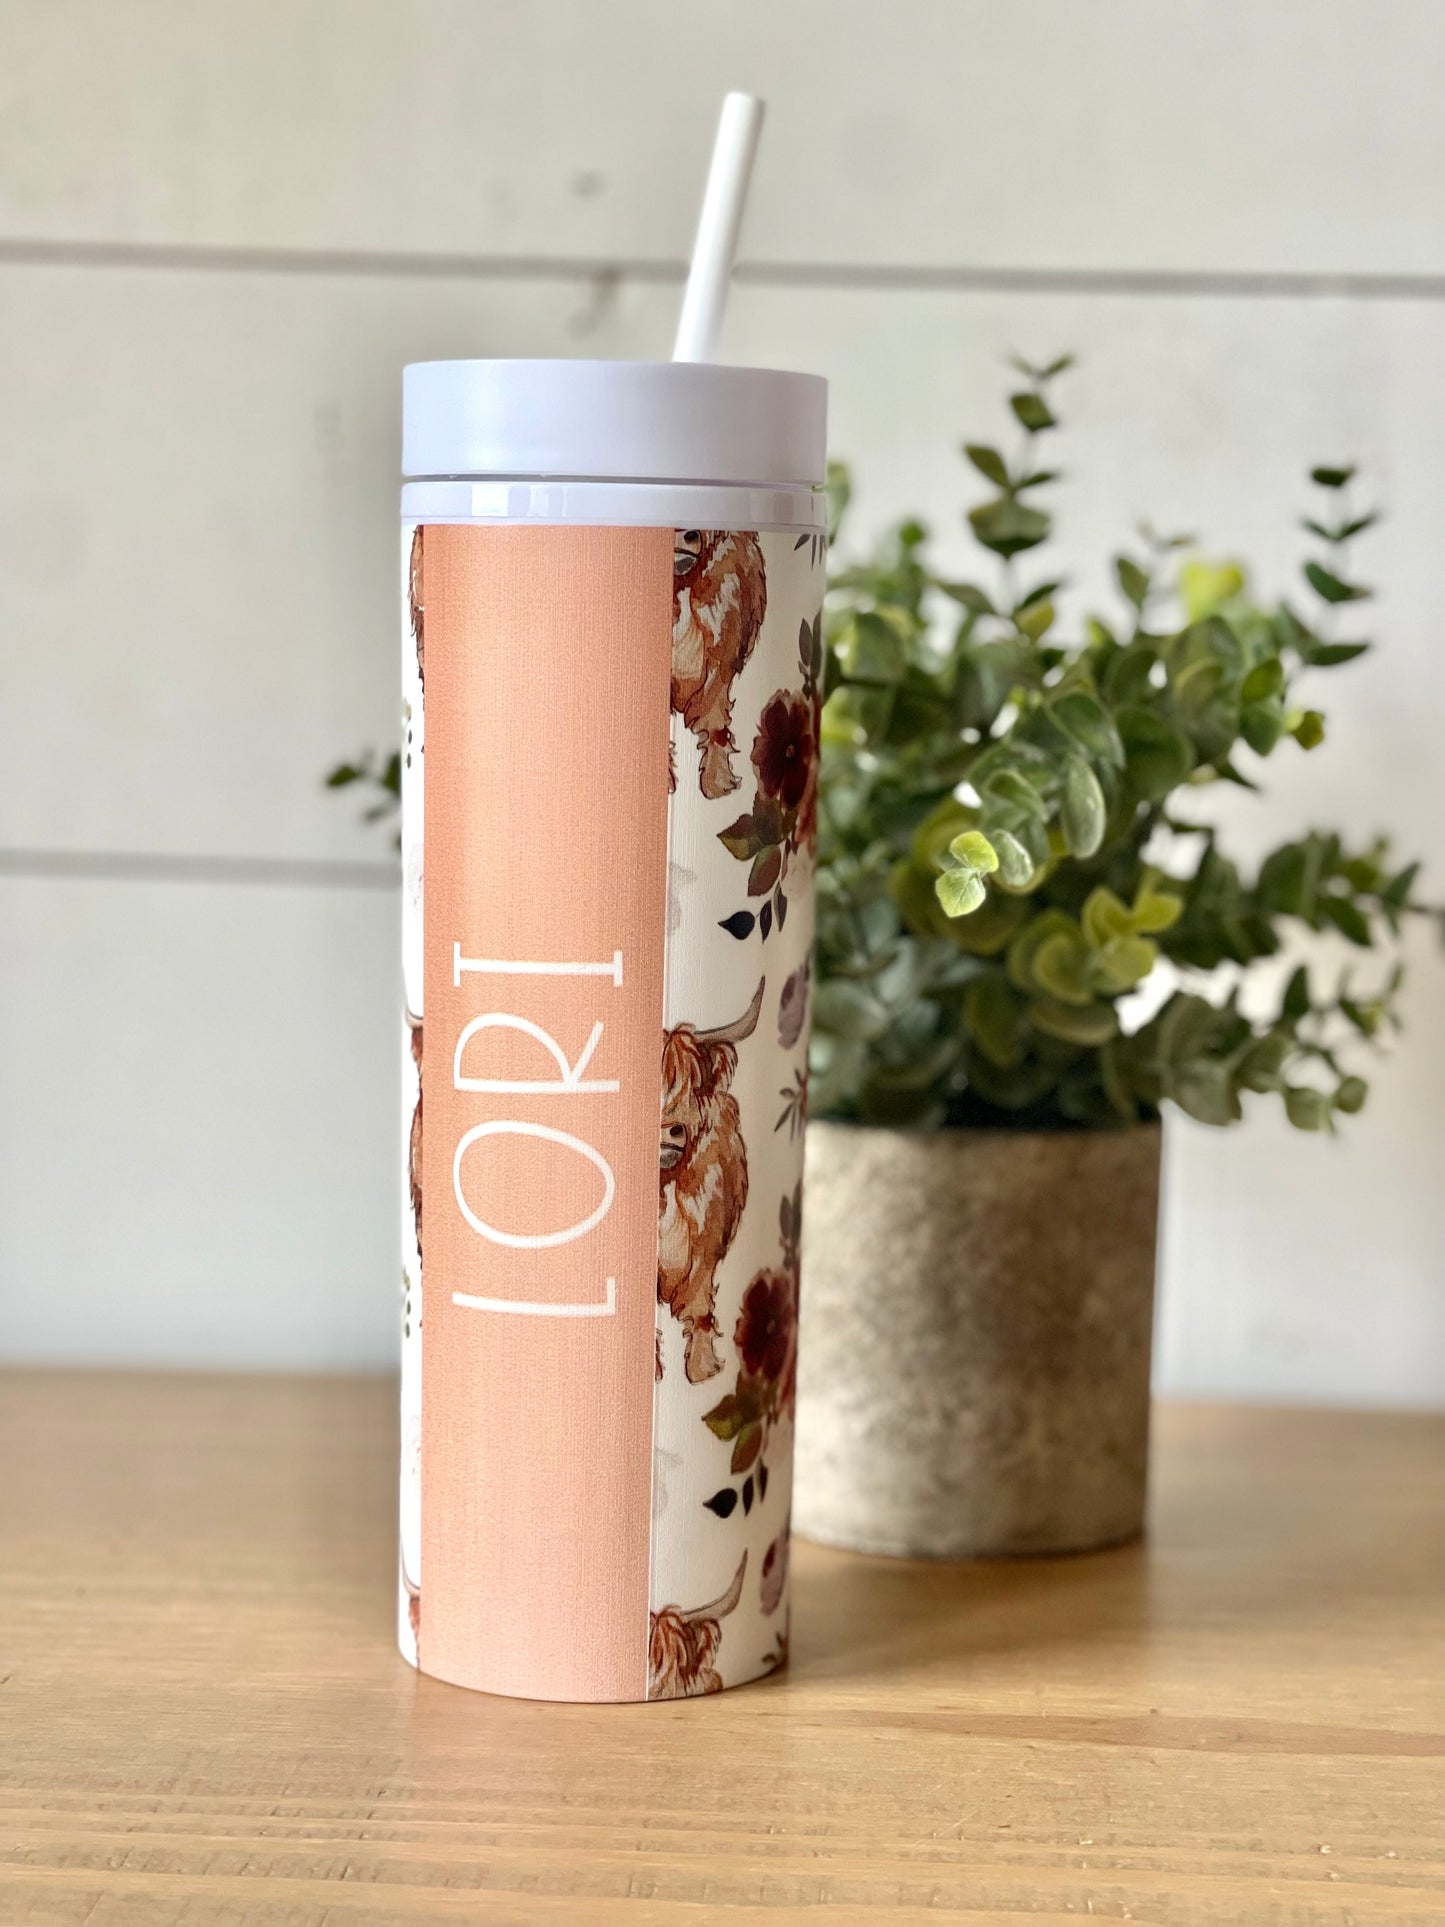 Watercolor Highland Cow Flower Personalized Skinny Tumbler with Lid and Straw, 16 oz Matte Black Acrylic Tumbler Insulated Double Wall Plastic Reusable Cups